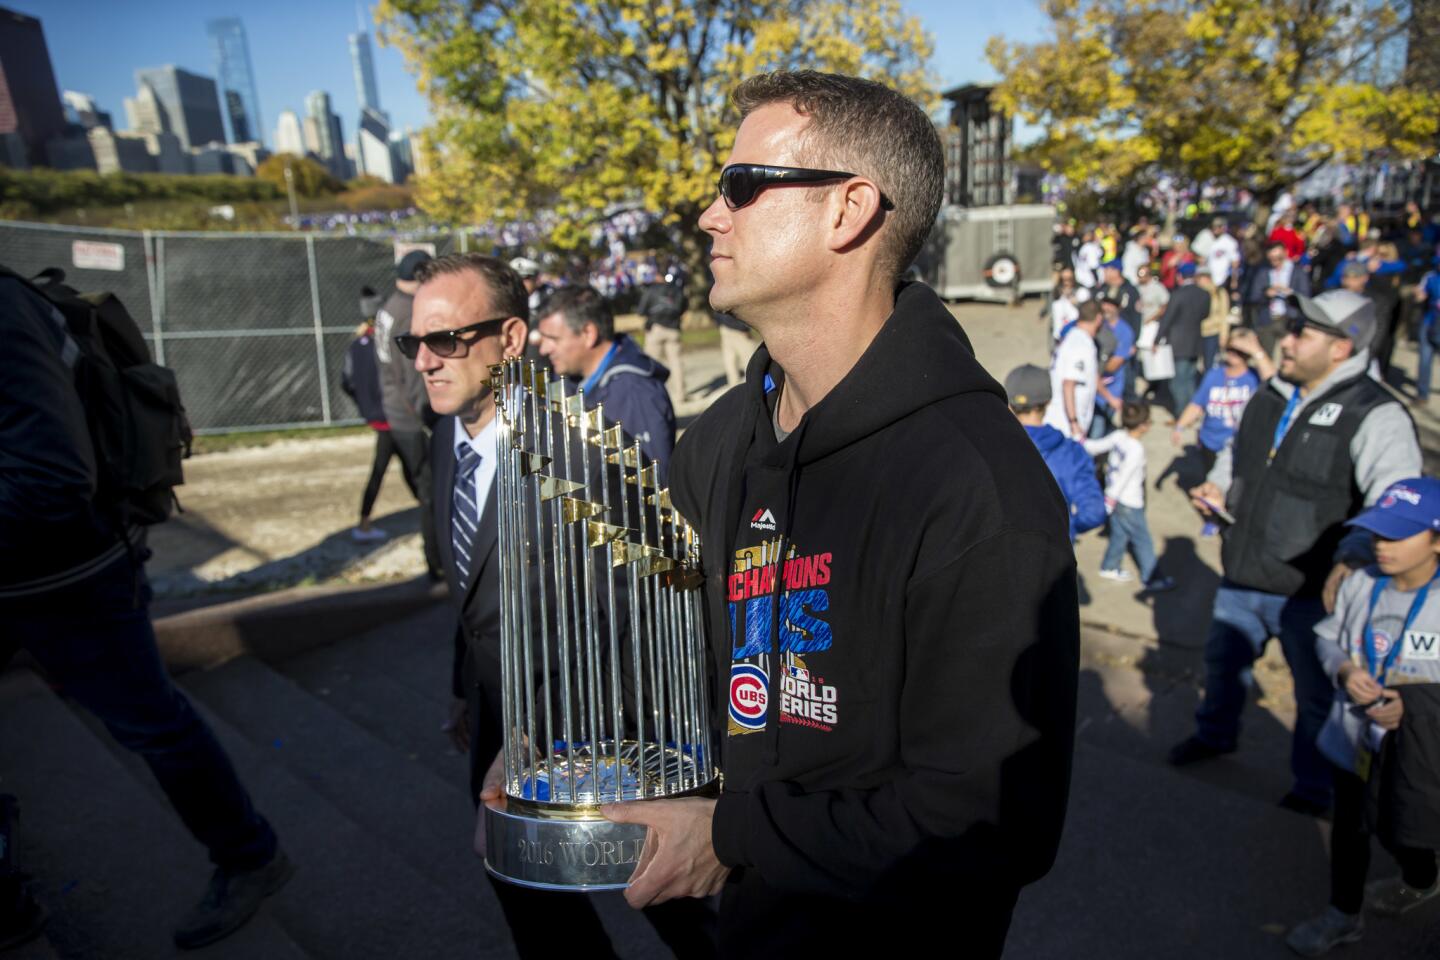 The World Series trophy awaits the winner of the Chicago Cubs and